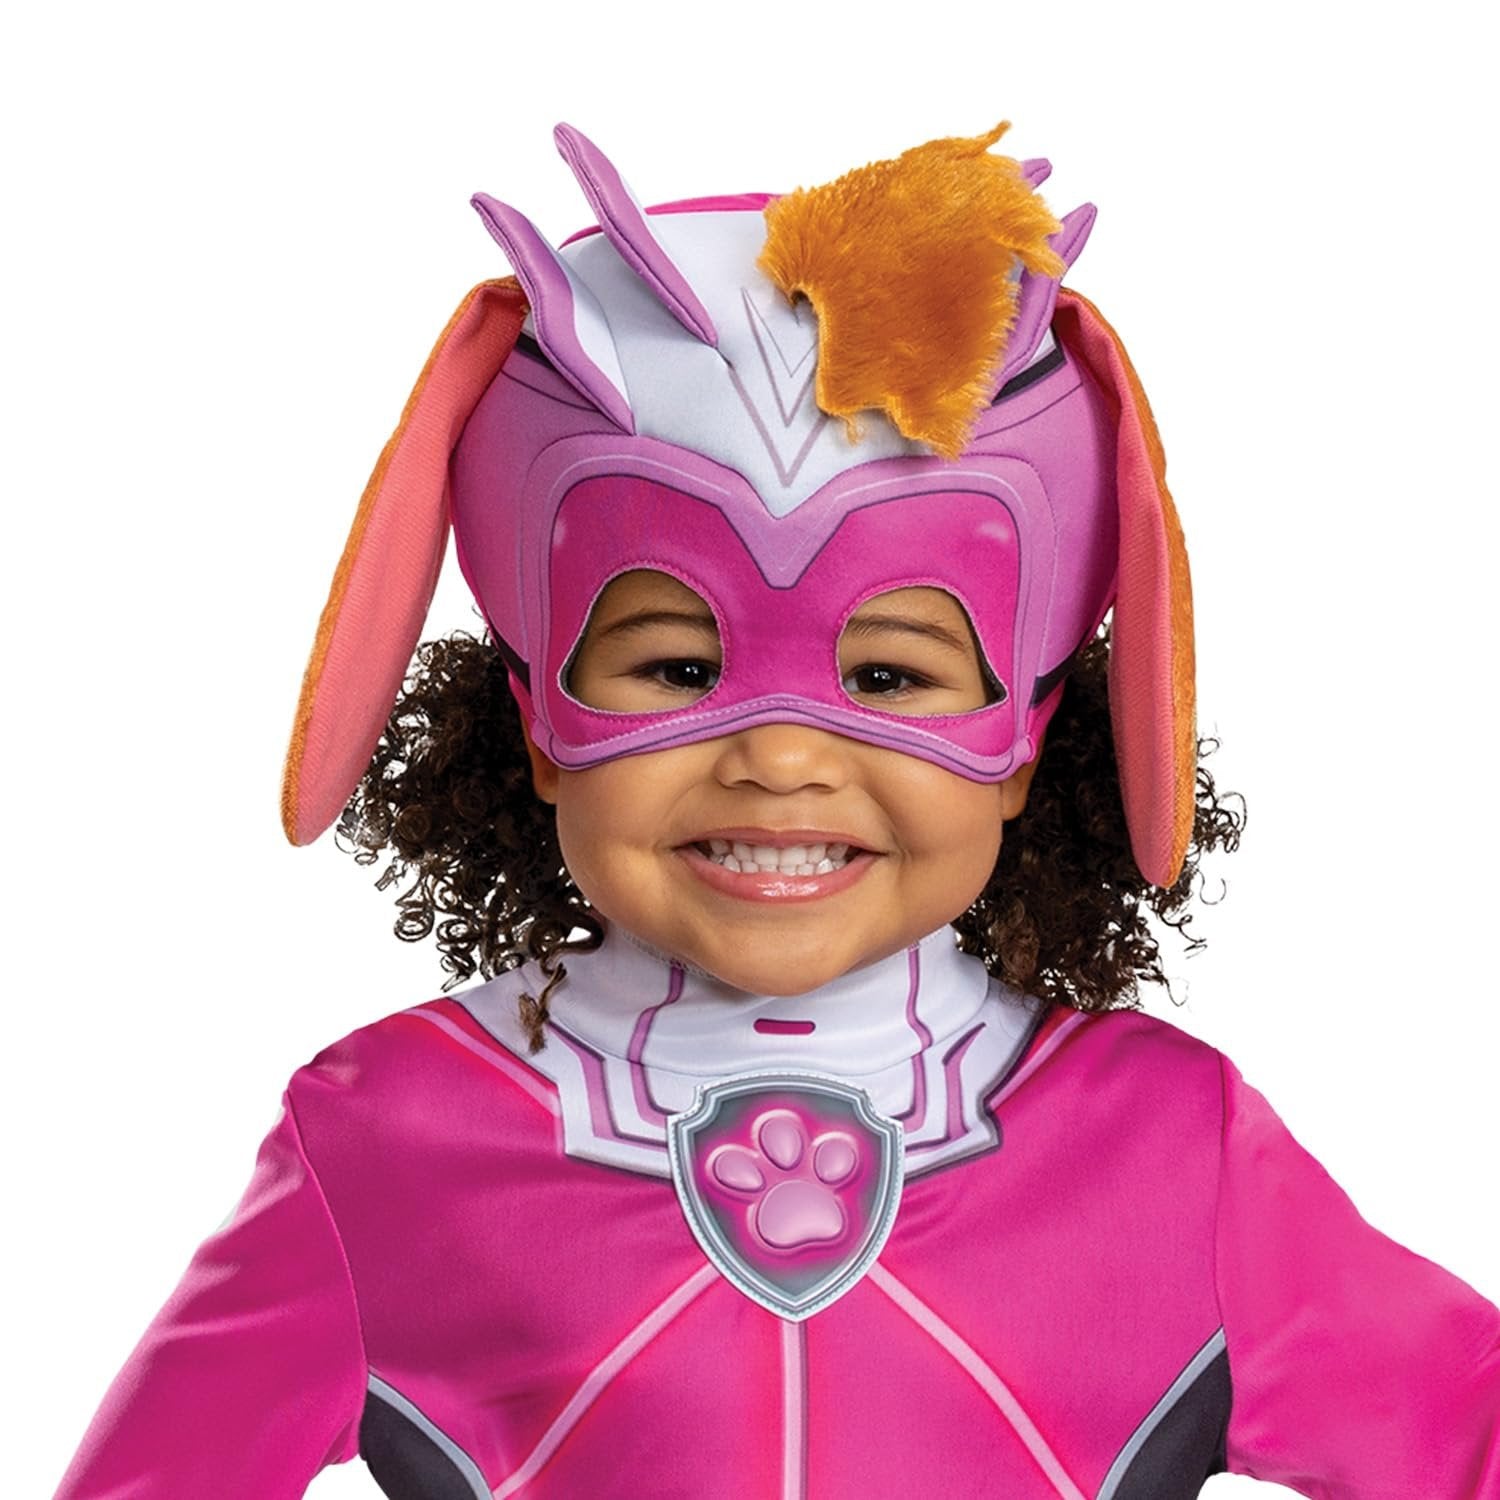 Skye Paw Patrol Costume, Official Paw Patrol Toddler Halloween Outfit with Headpiece for Kids, Size (3T-4T)